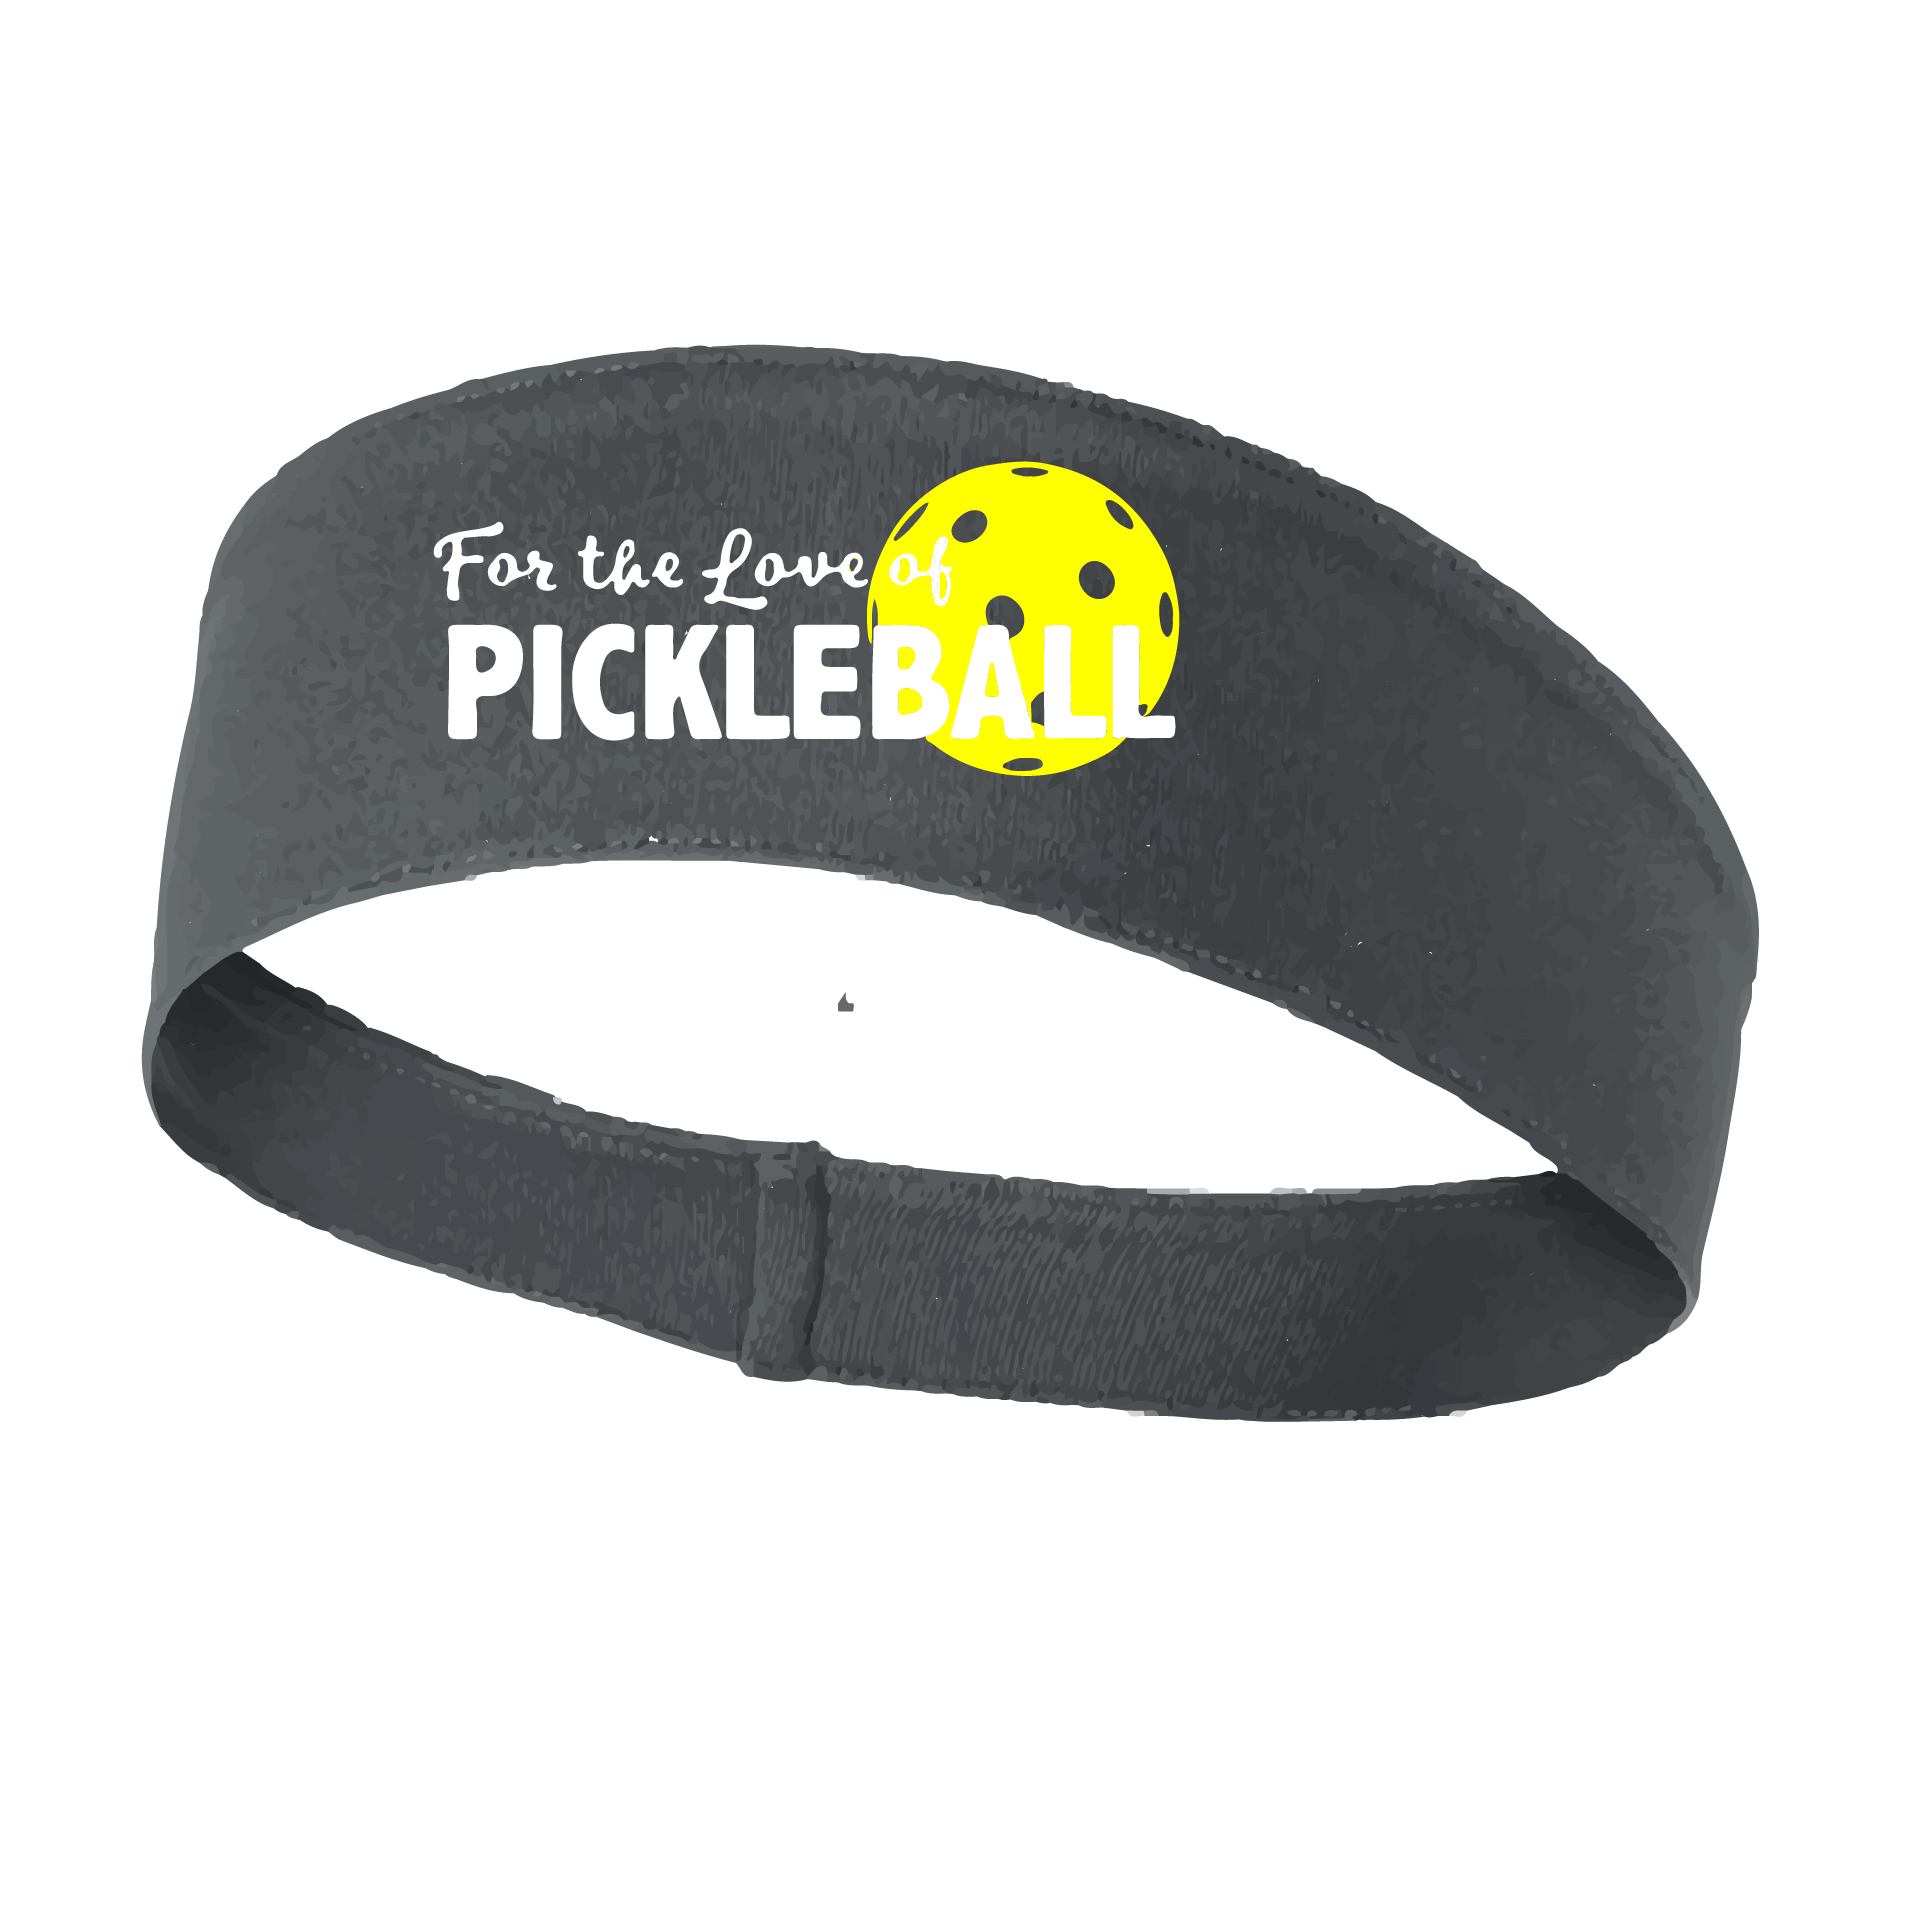 Pickleball Design: For the Love of Pickleball  This fun, pickleball designed, moisture-wicking headband narrows in the back to fit more securely. Single-needle top-stitched edging. These headbands come in a variety of colors. Truly shows your love for the sport of pickleball!!